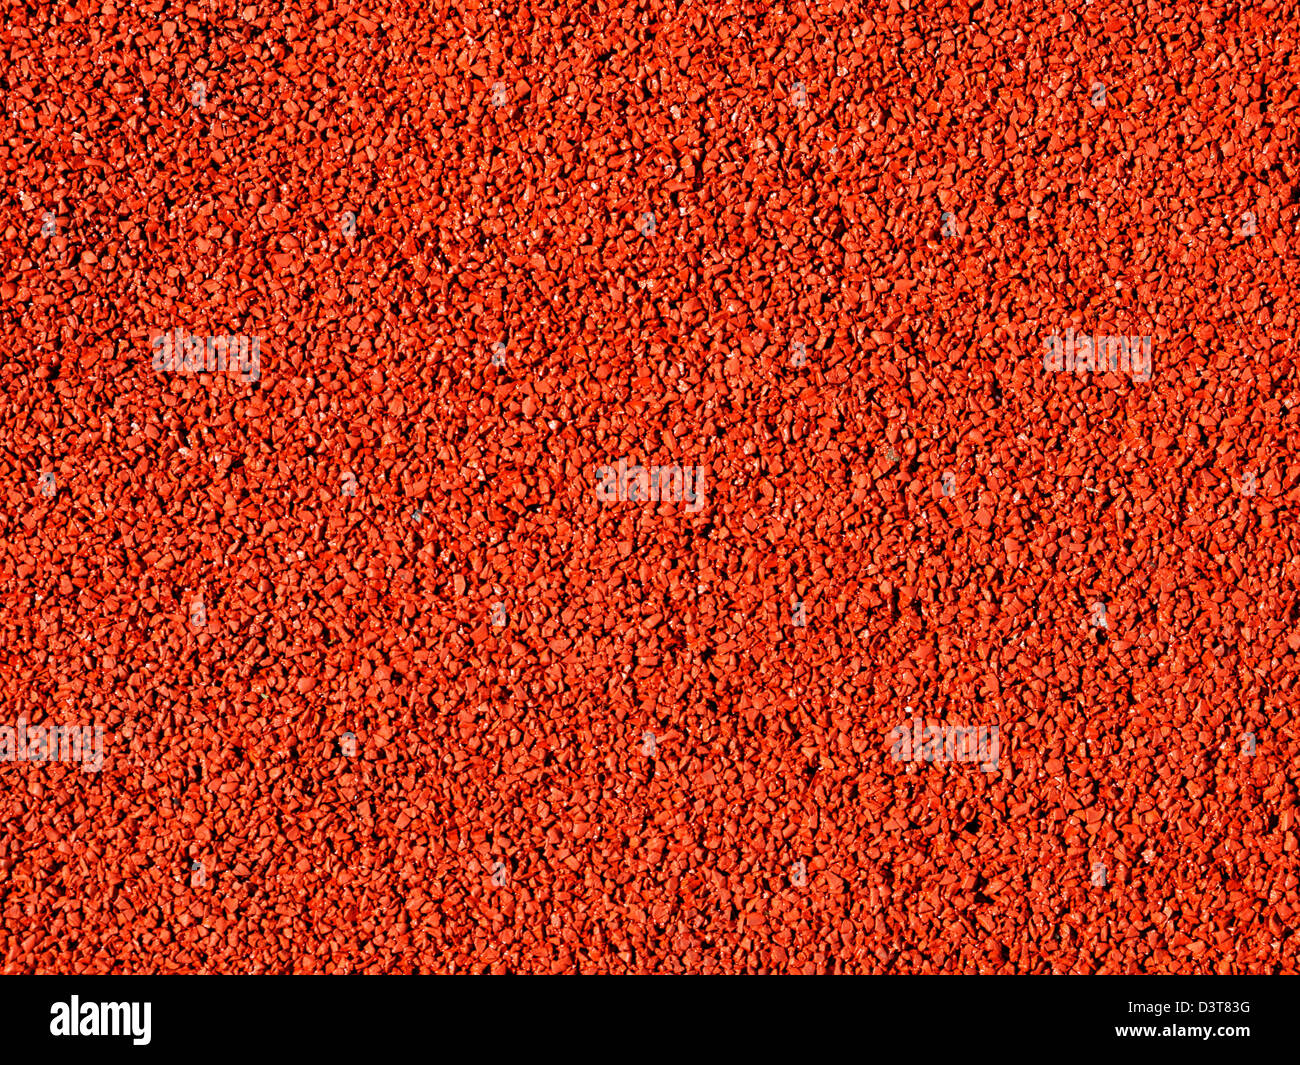 A red macadam pavement texture Stock Photo